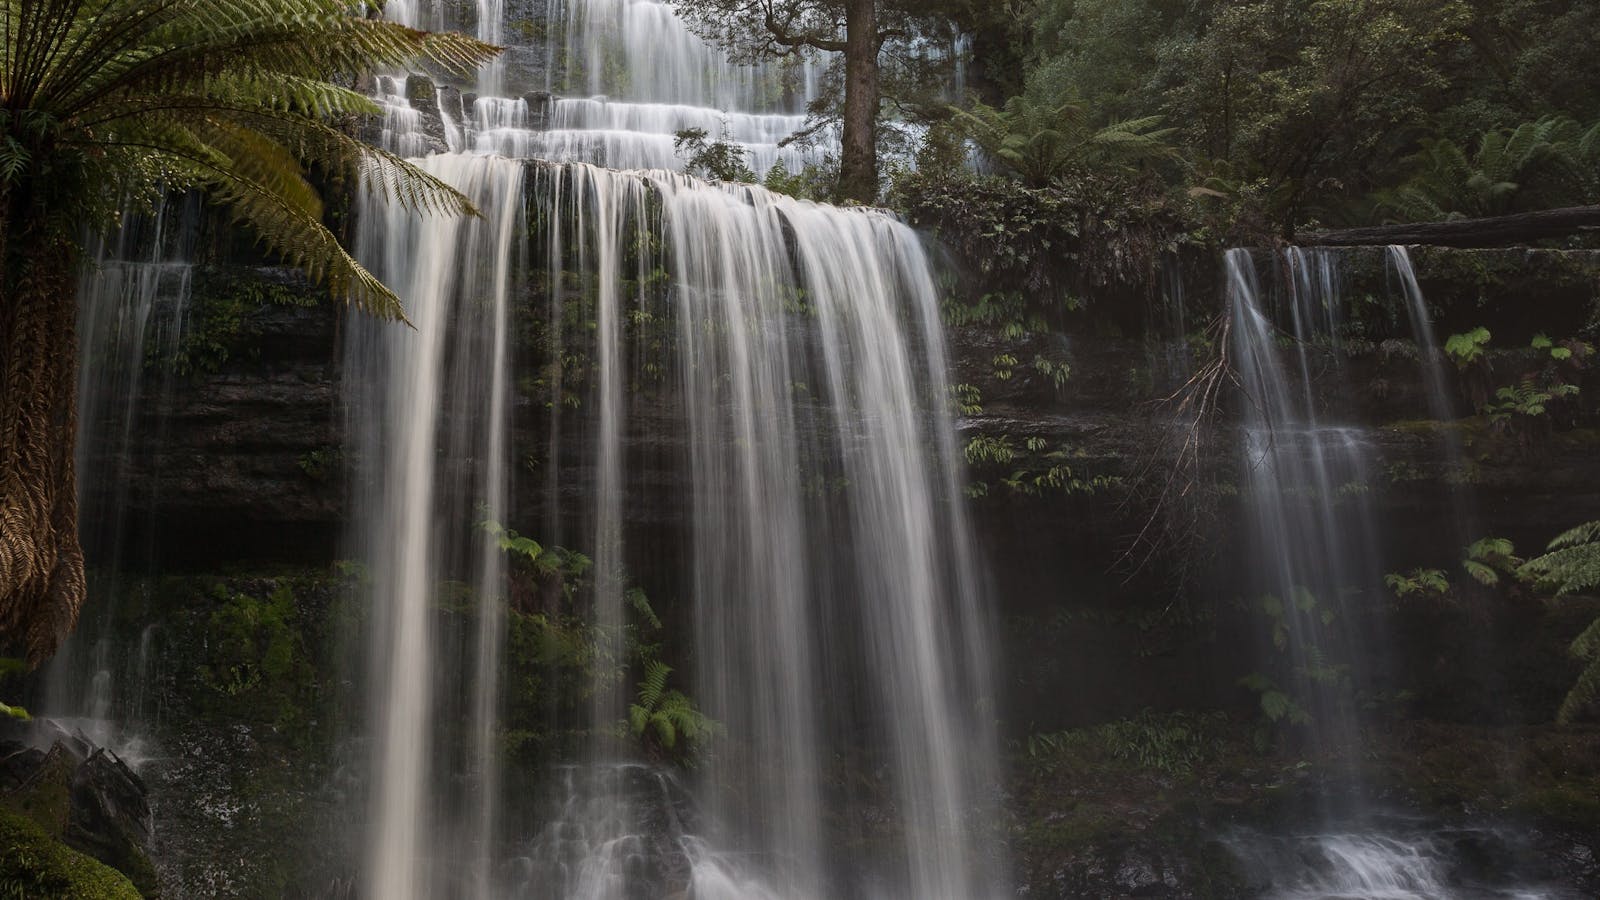 Improve your waterfall photography skills and techniques at one of the many waterfalls in Tasmania